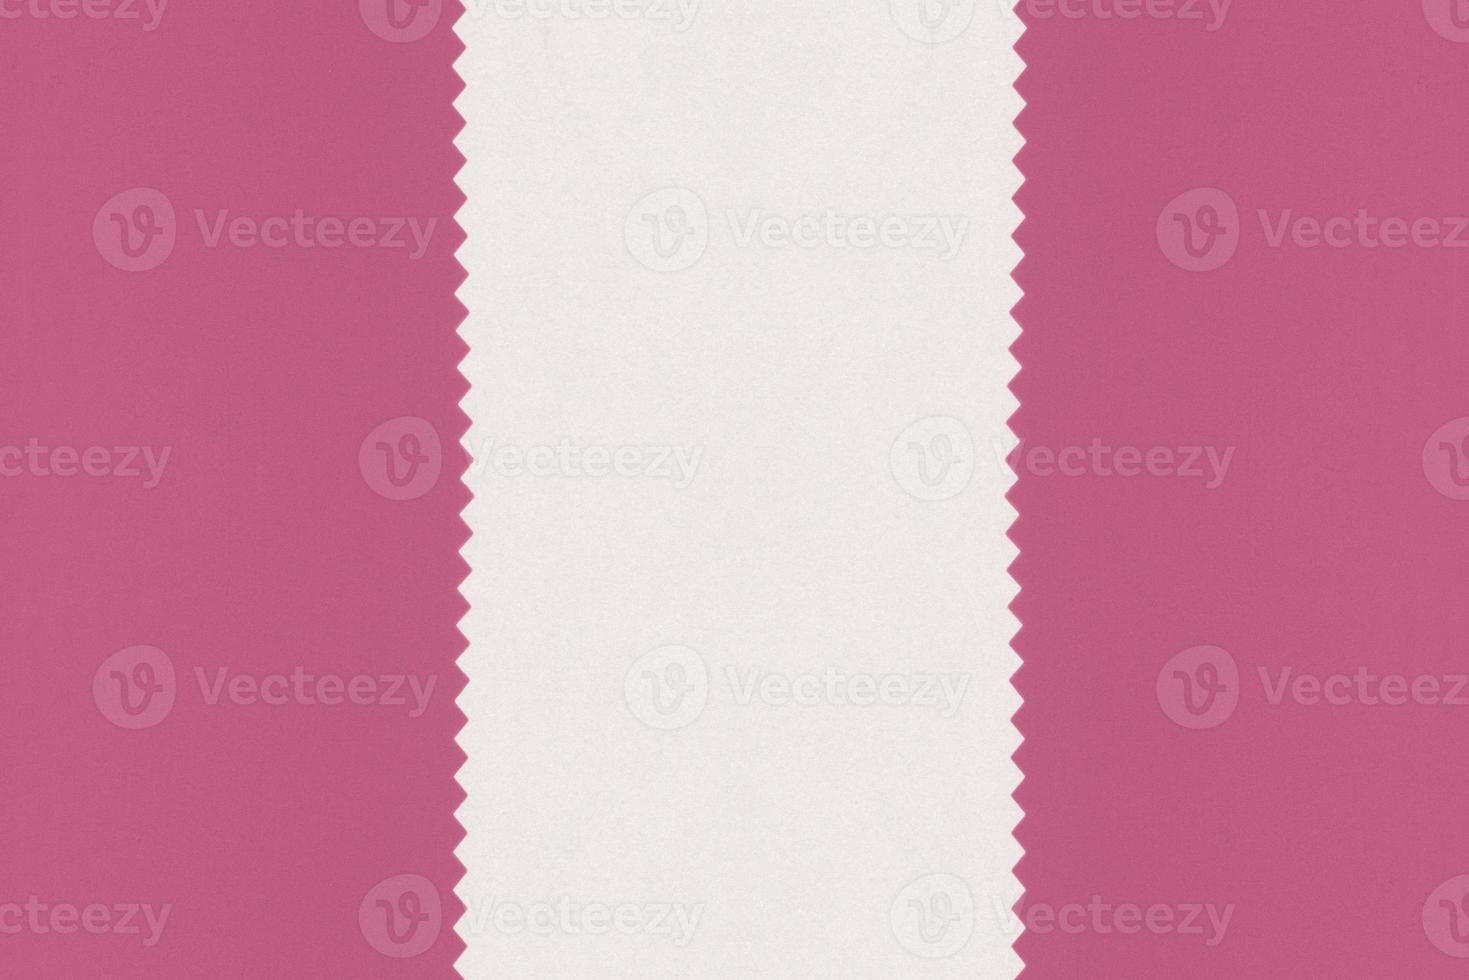 Pink and light brown cardboard texture background photo